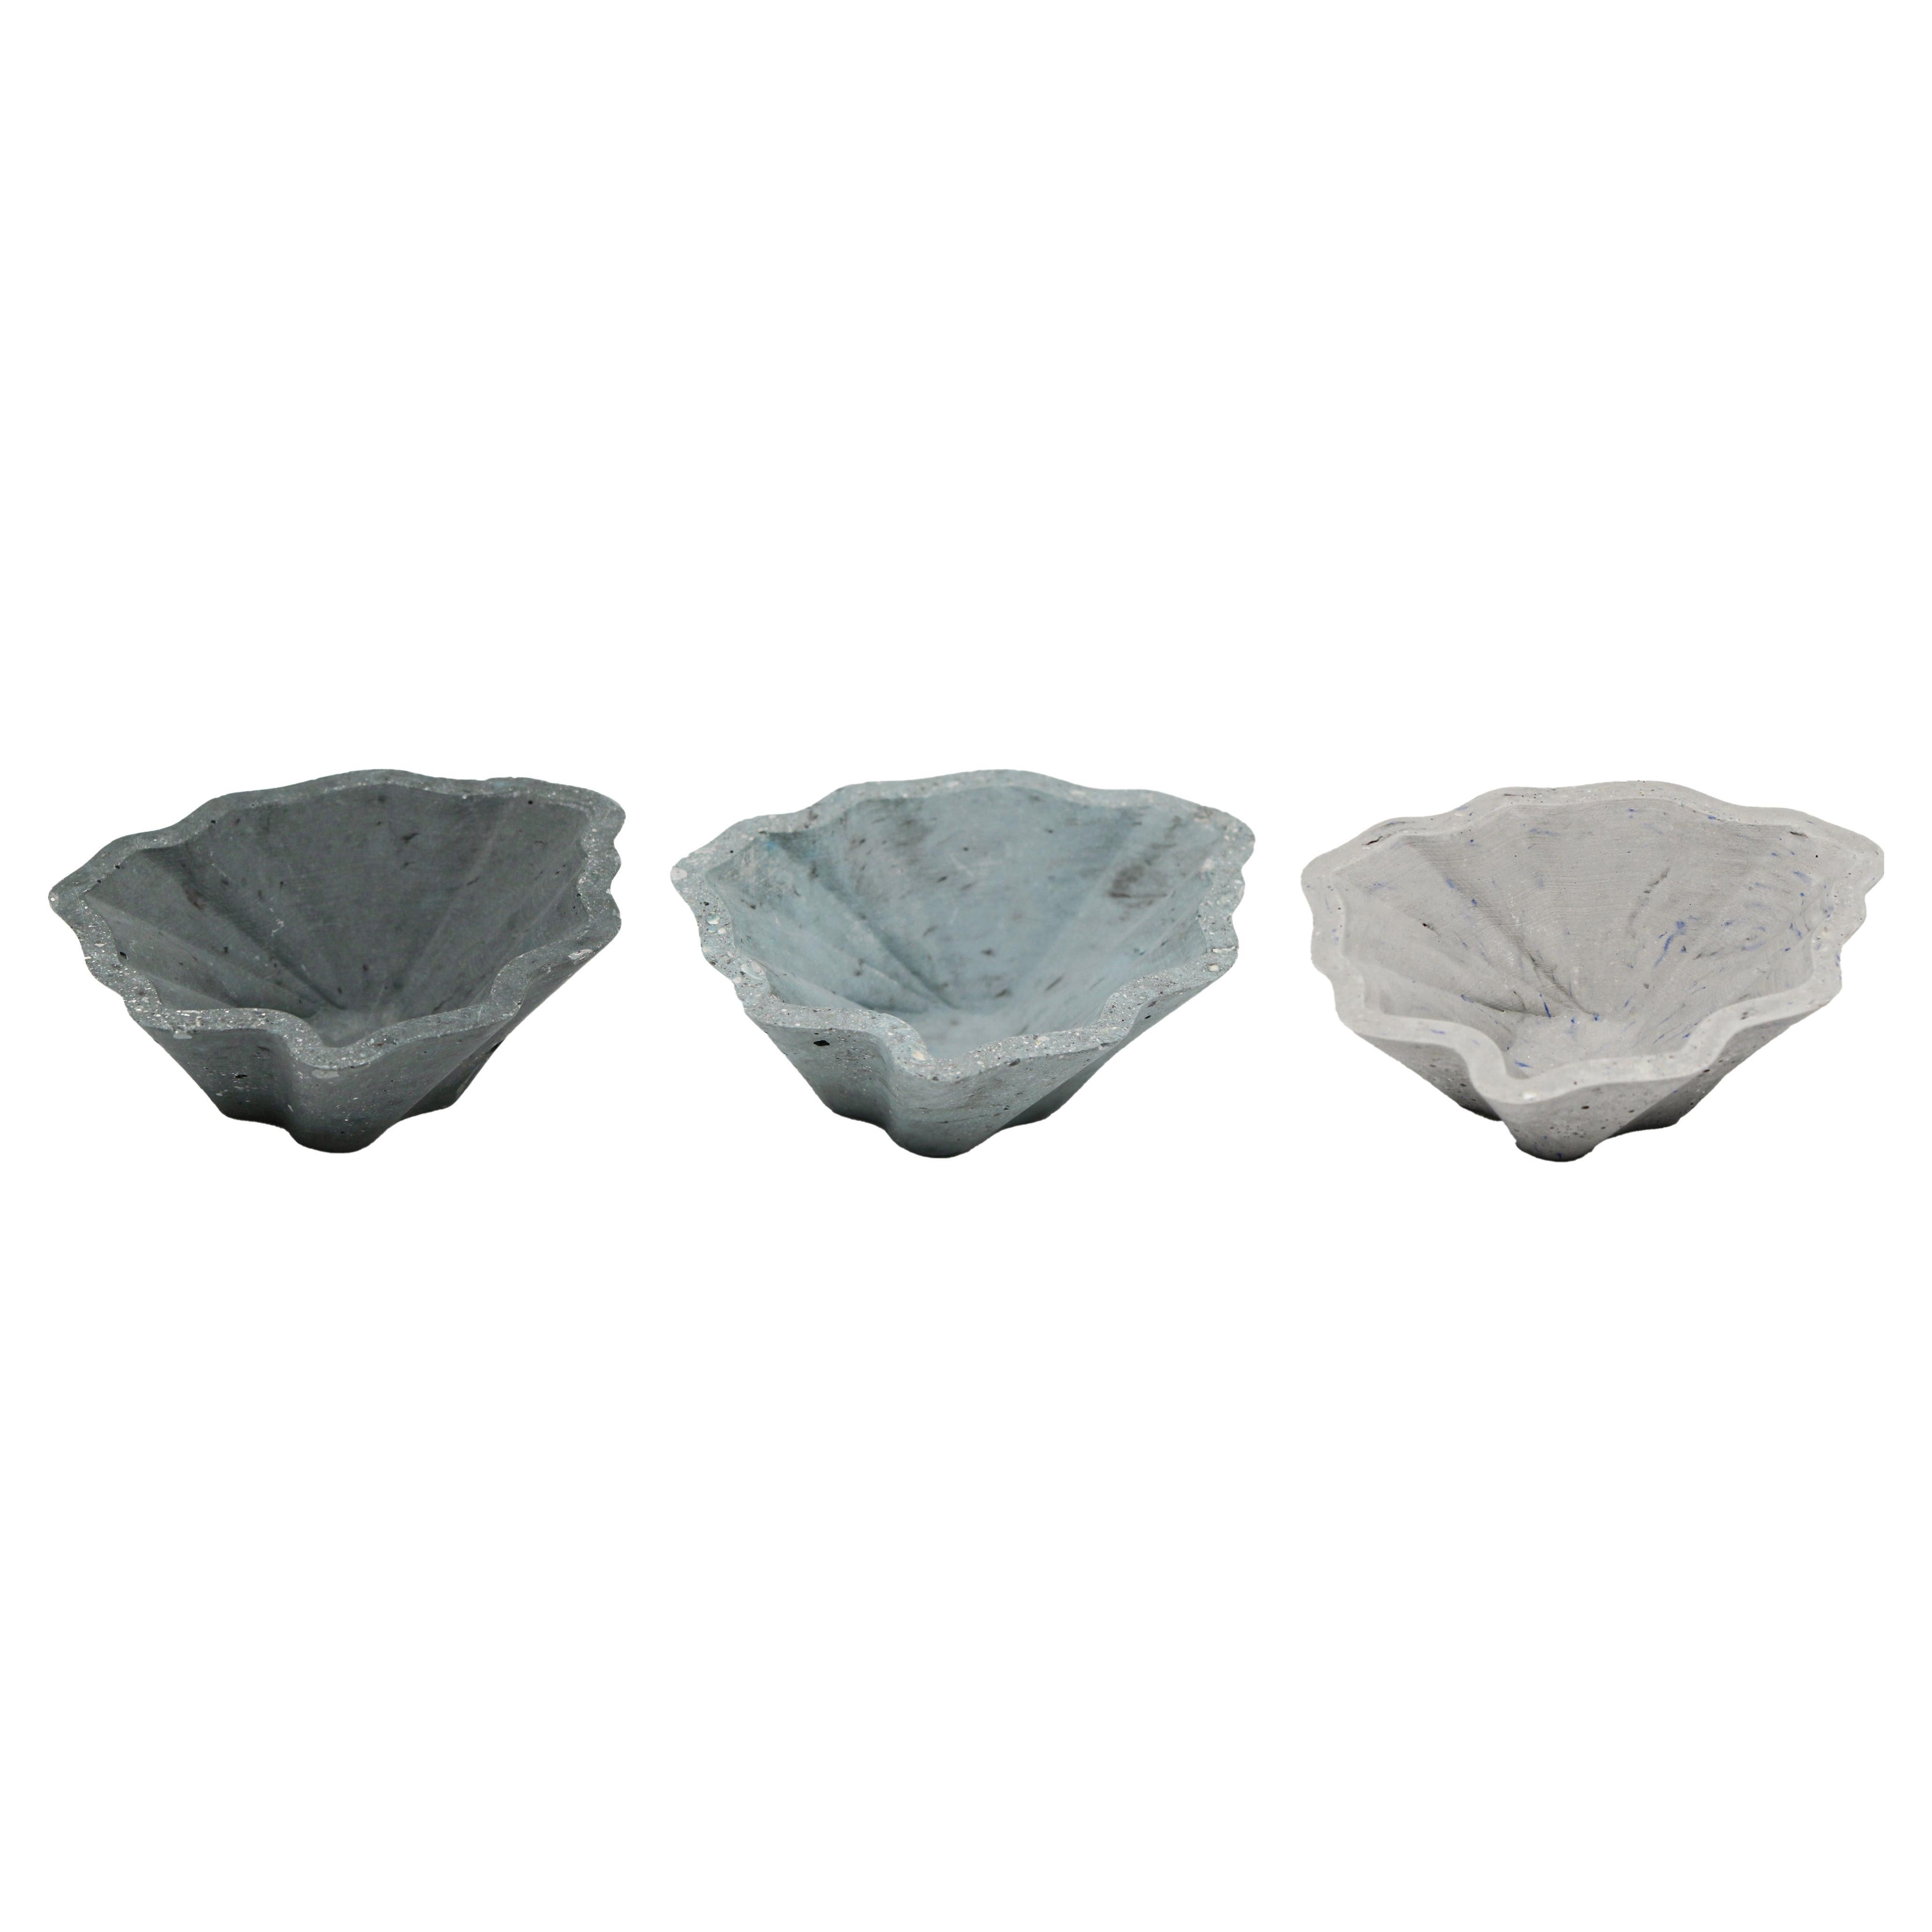 Set of 3 Oyster Shell Trays. From the Oygg series 